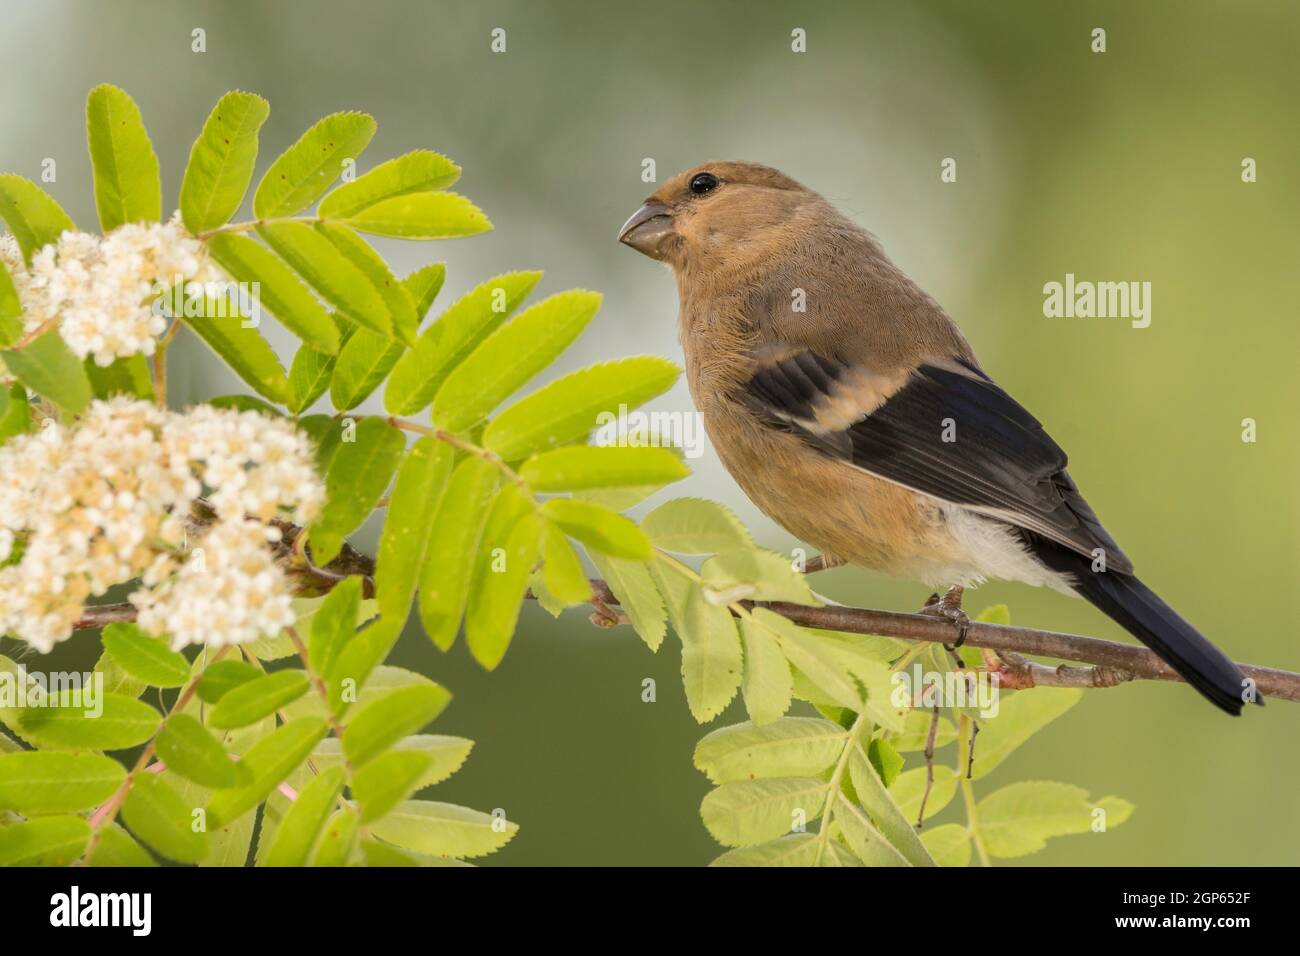 profile and close up of  a young finch on branch with flowers Stock Photo